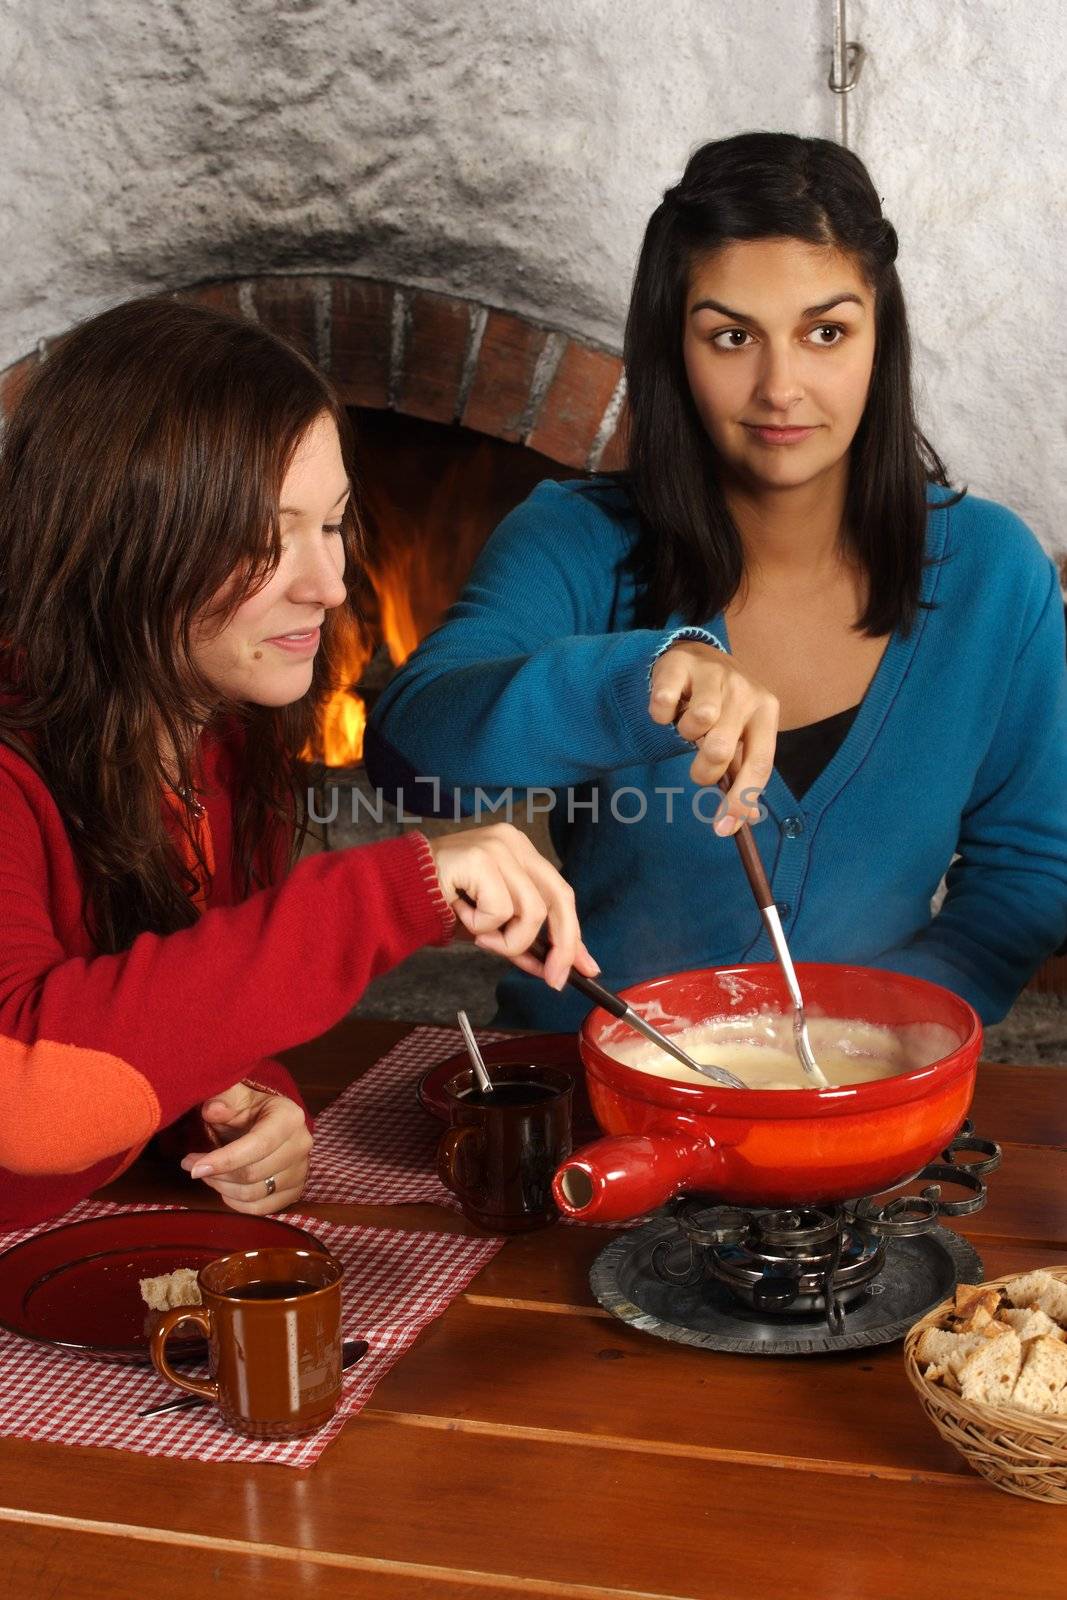 Photo of two beautiful females dipping bread into the melted cheese in a fondue pot. Focus is on girl on the left.